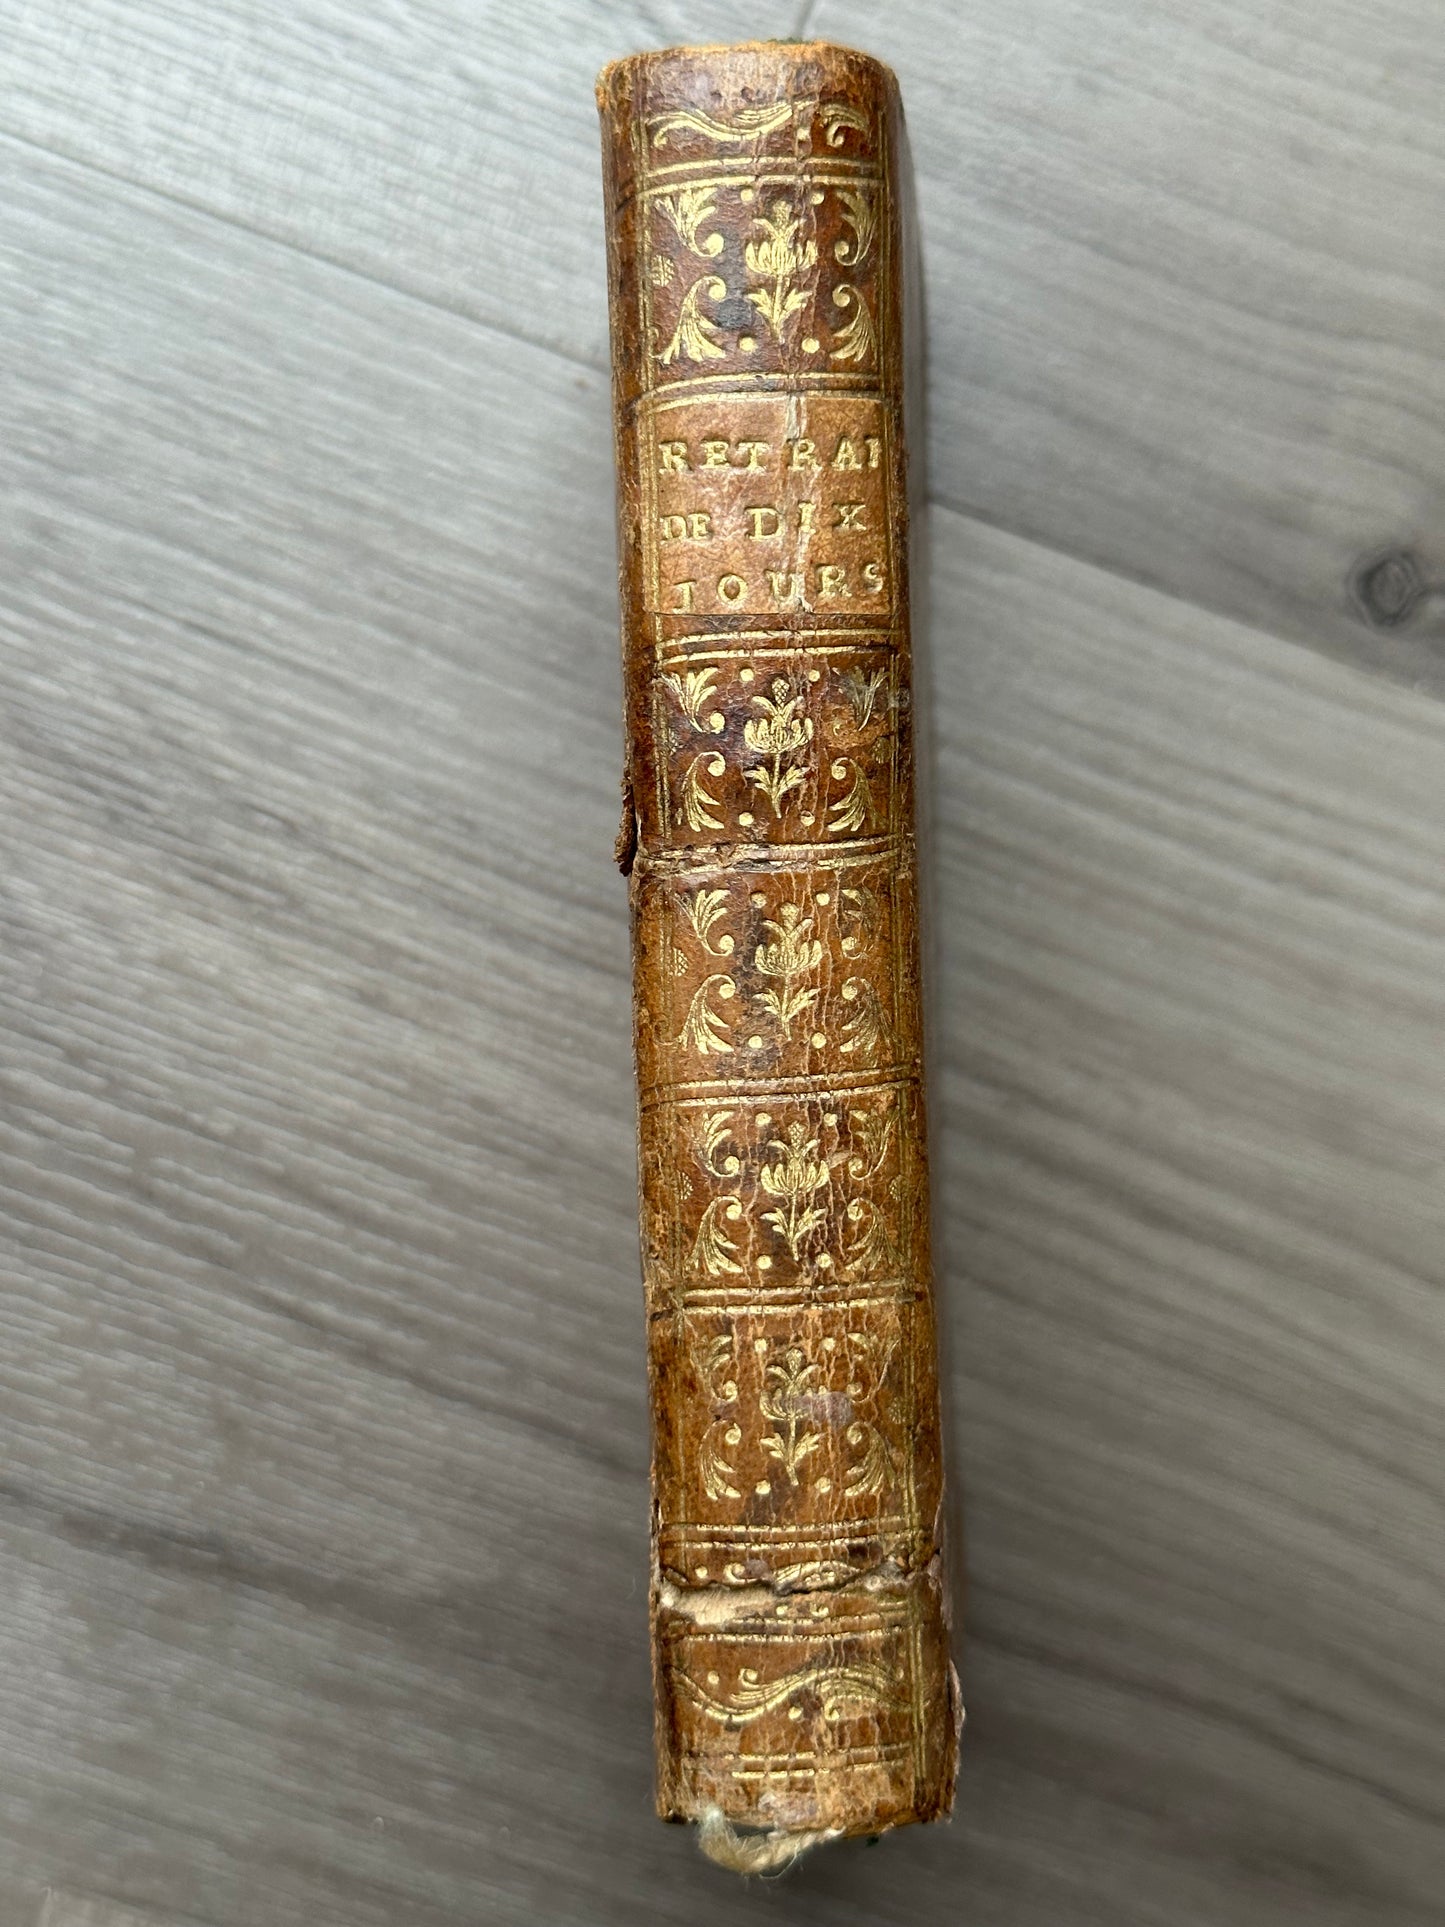 1764 French Religion Book